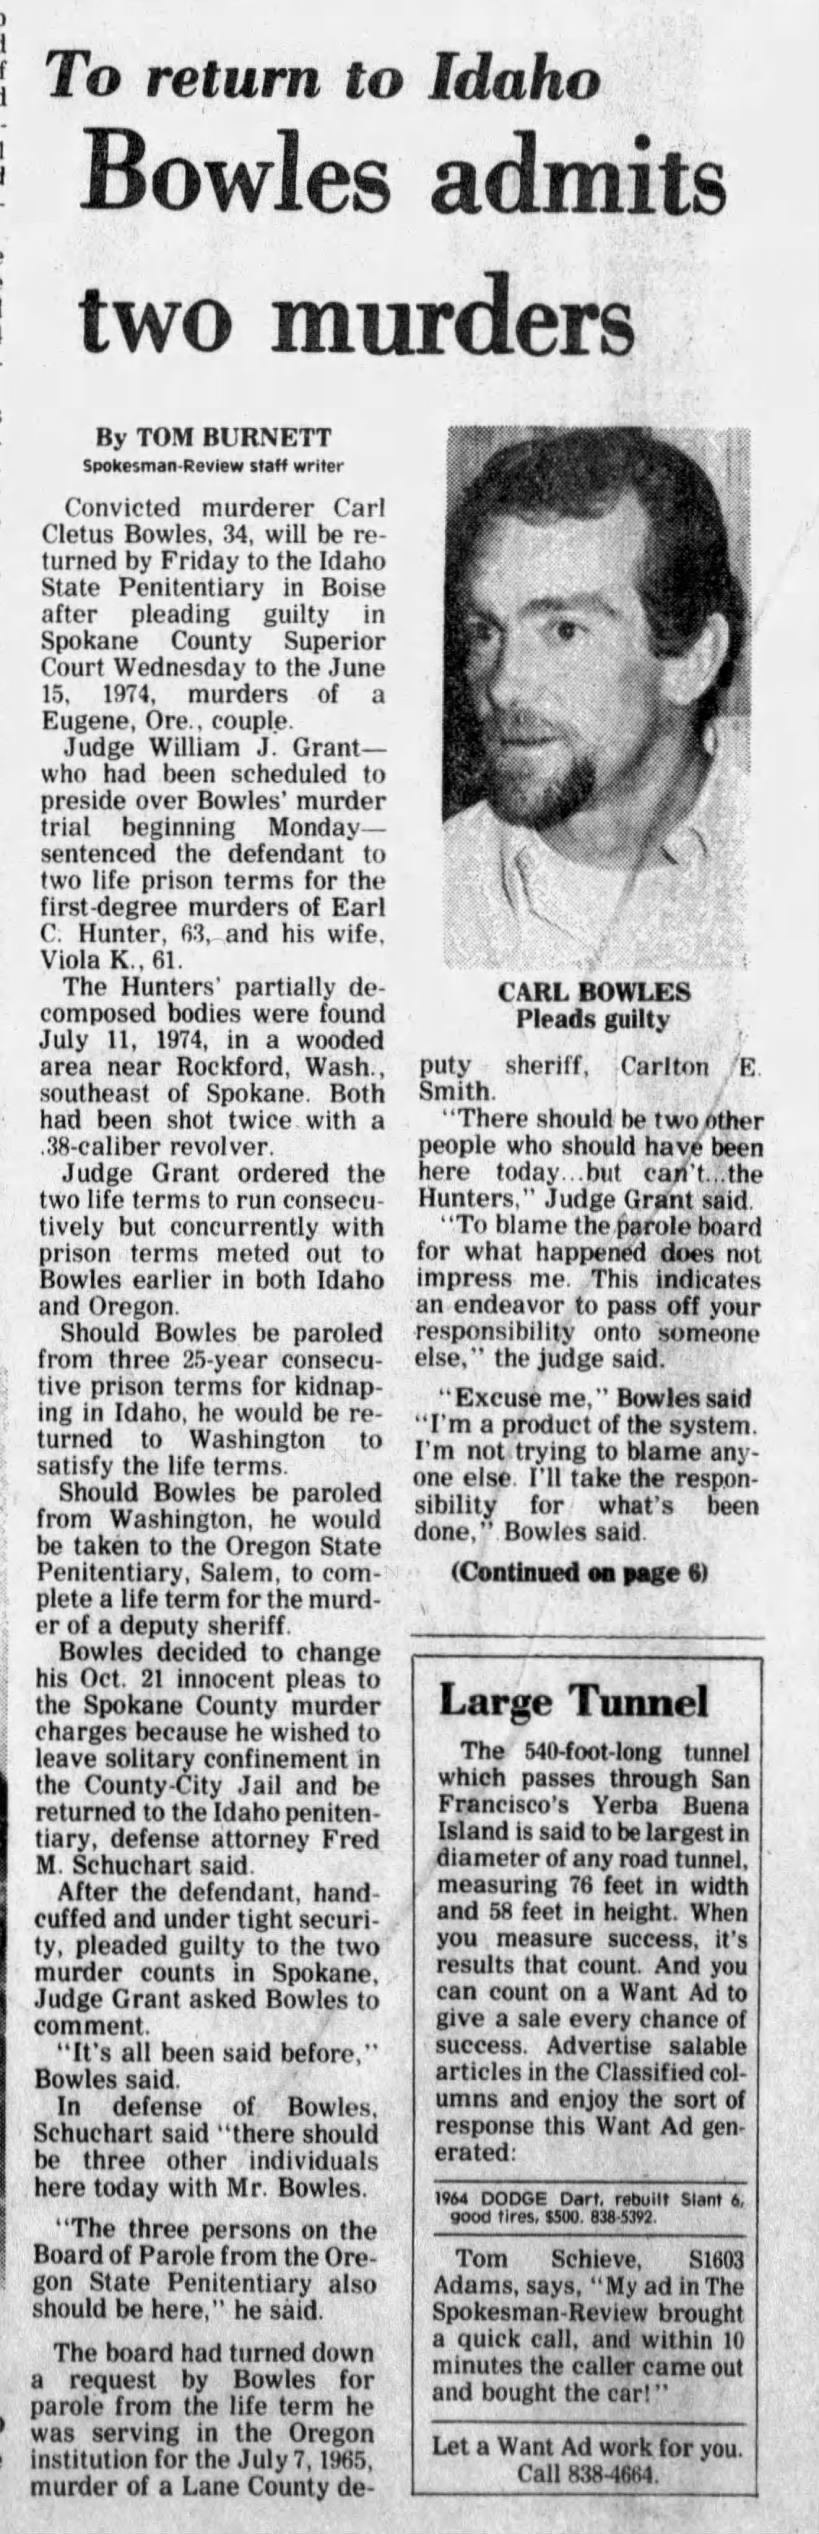 11.13.75
bowles admits two murders page 1